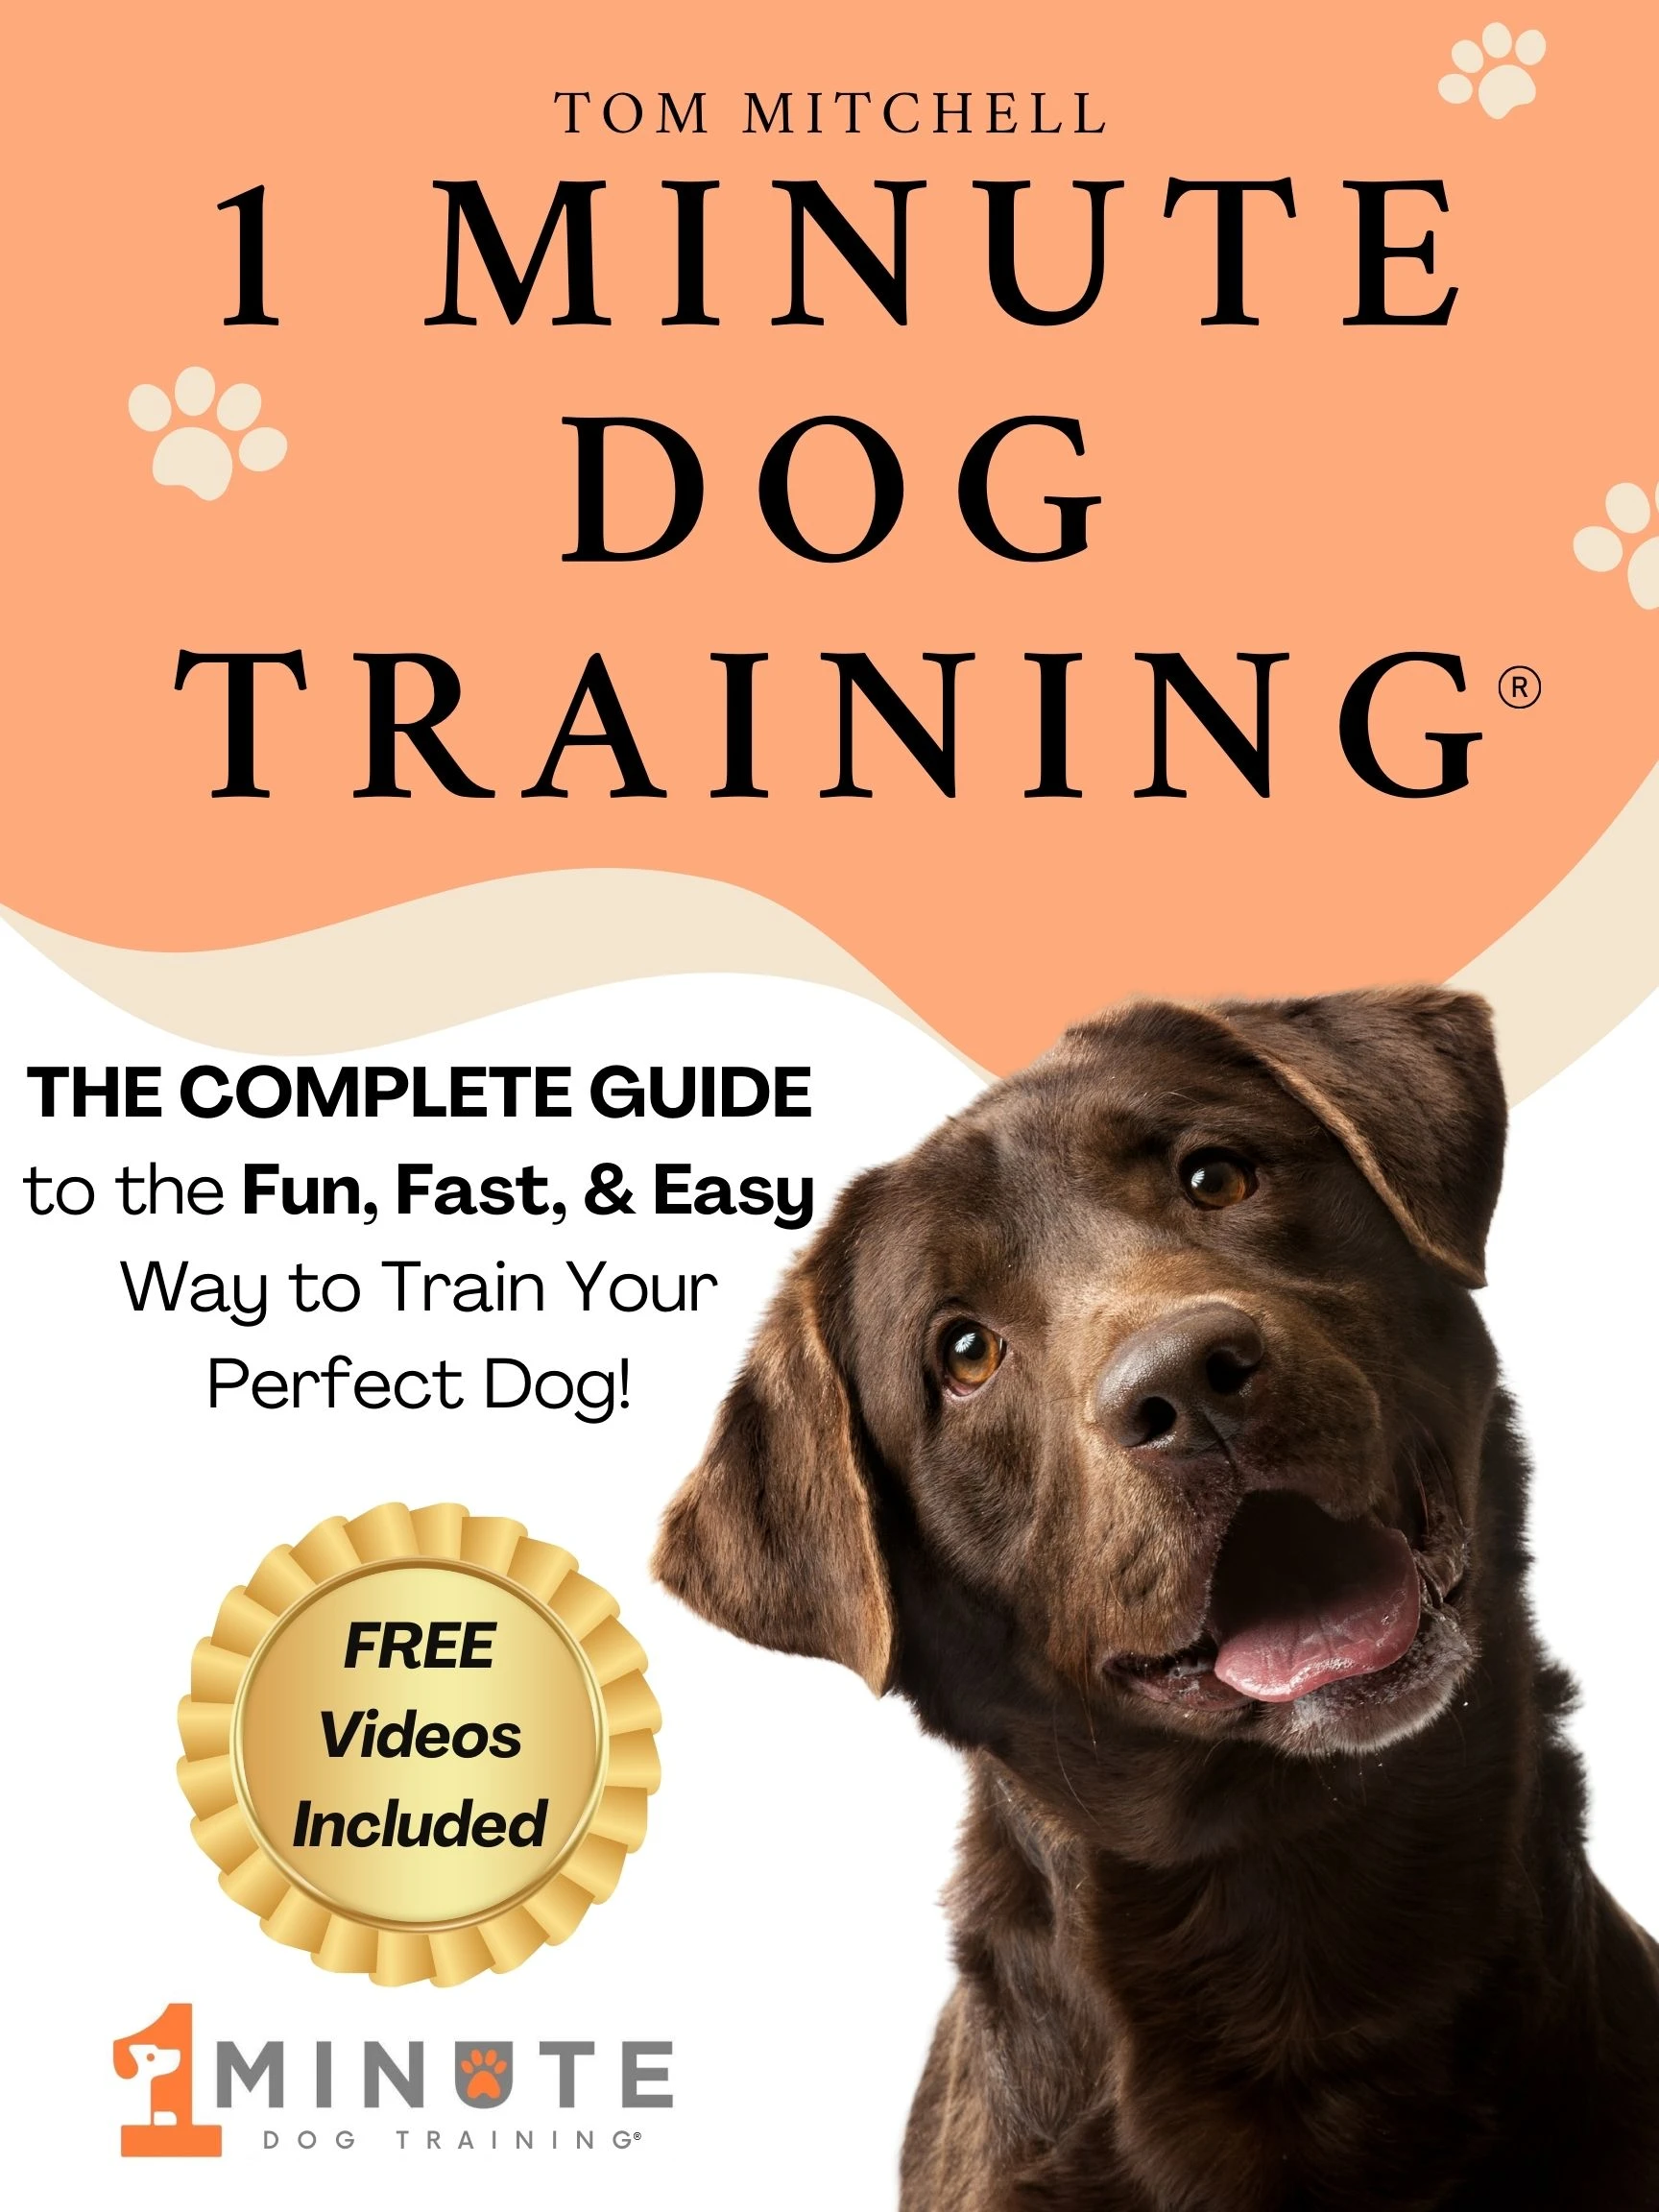 1 Minute Dog Training®: The Complete Guide to the Fun, Fast, and Easy Way to Train Your Perfect Dog